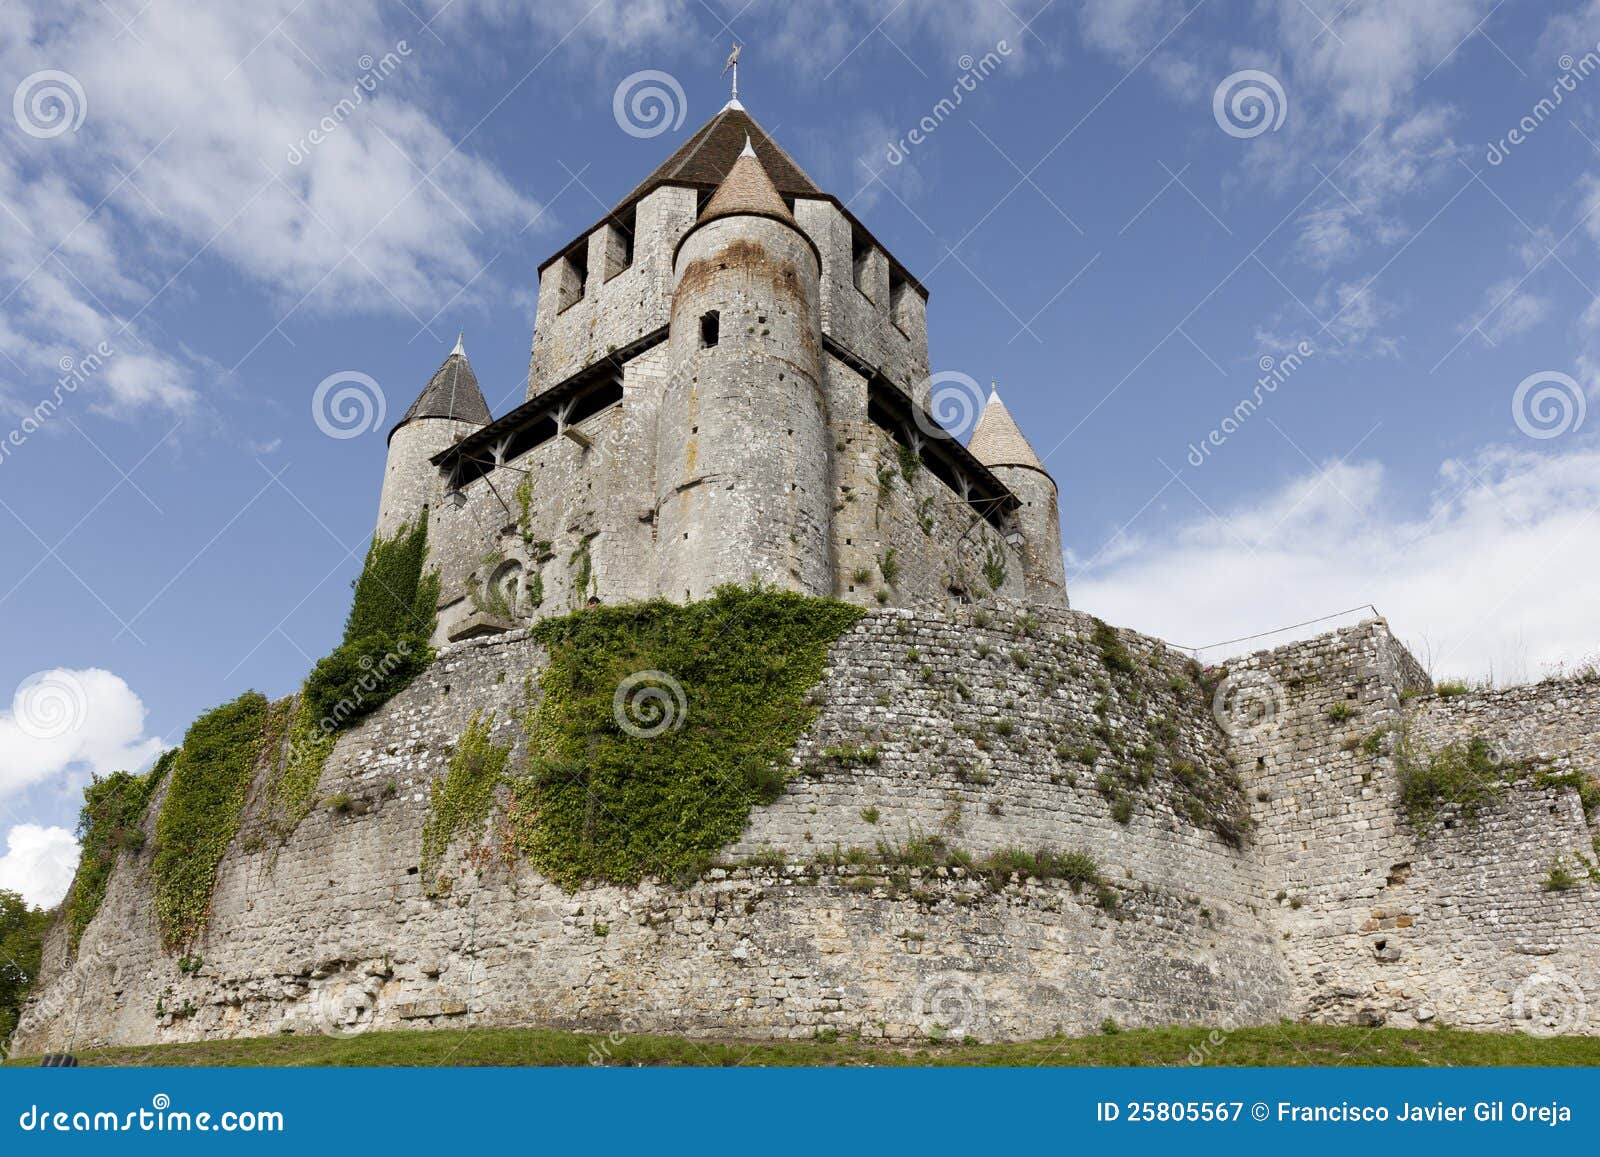 cesar tower in provins